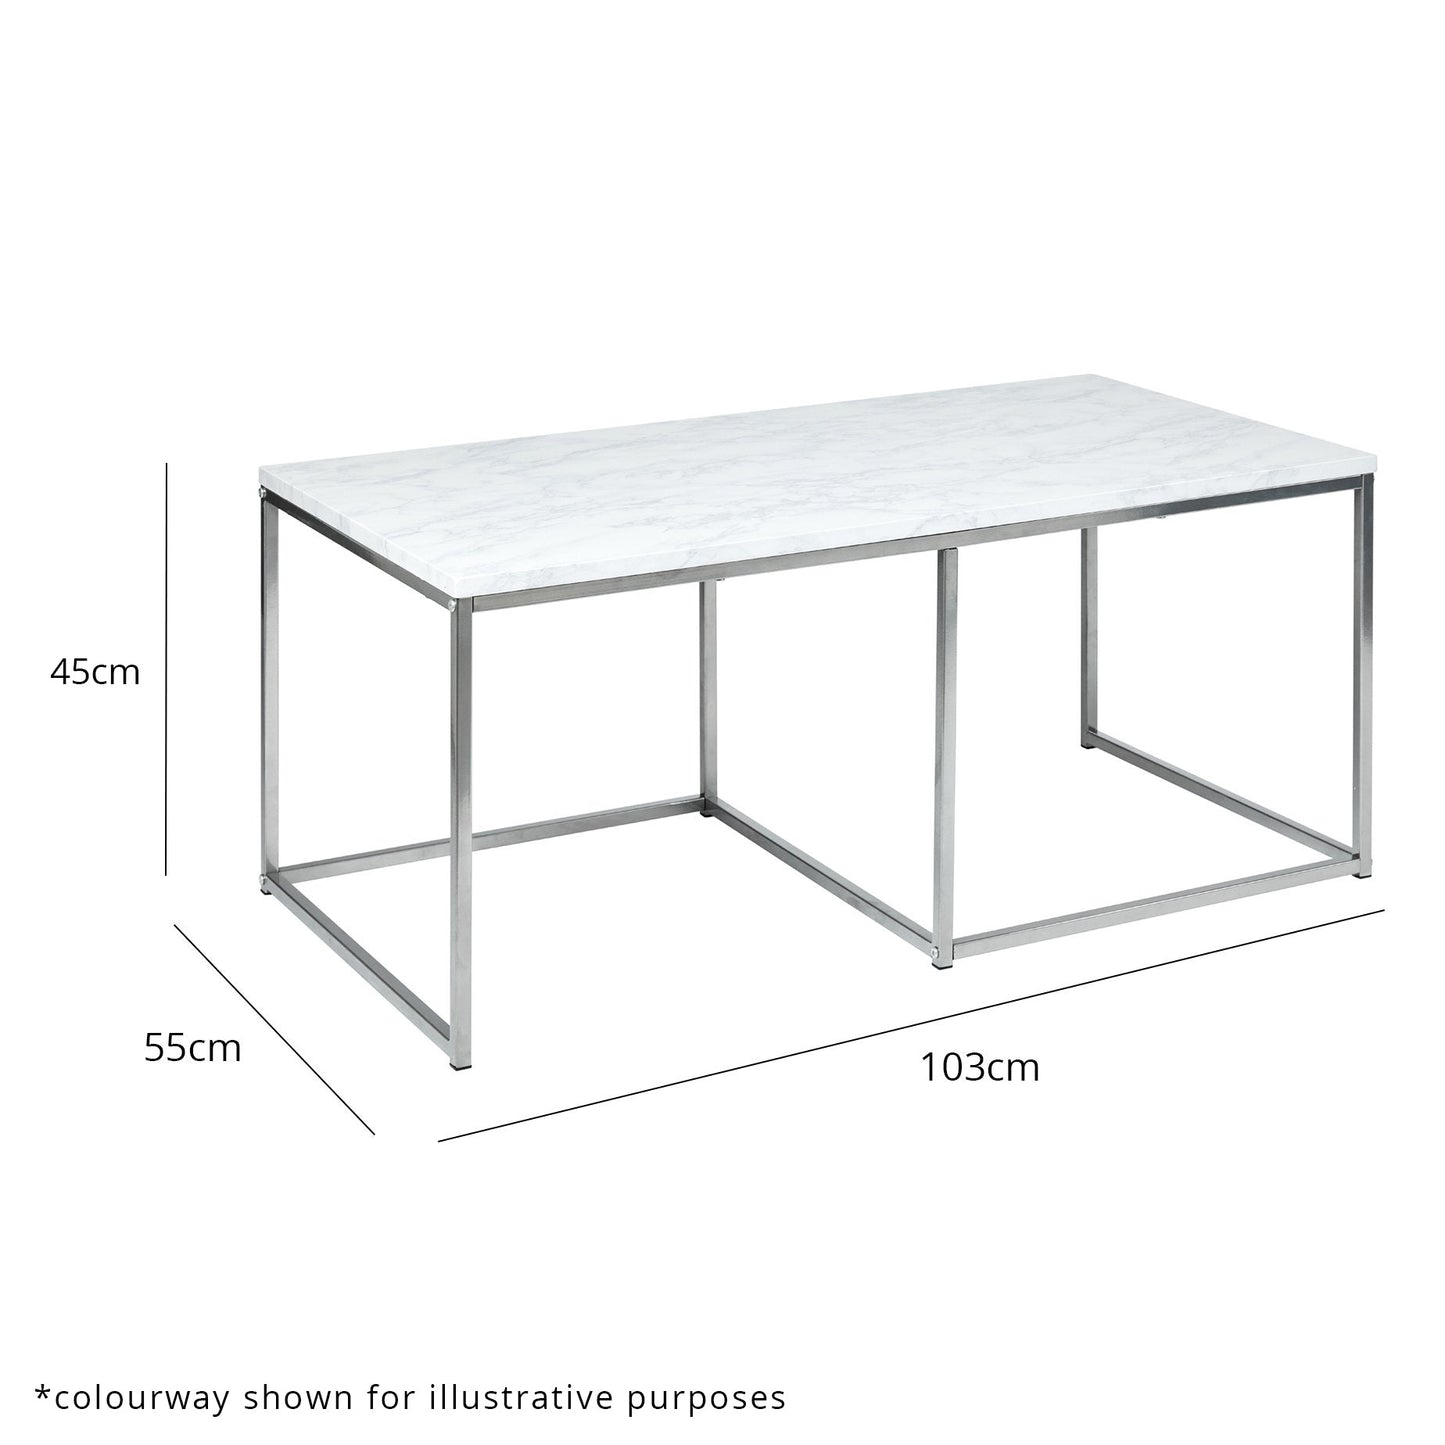 Jay coffee table - marble effect and black